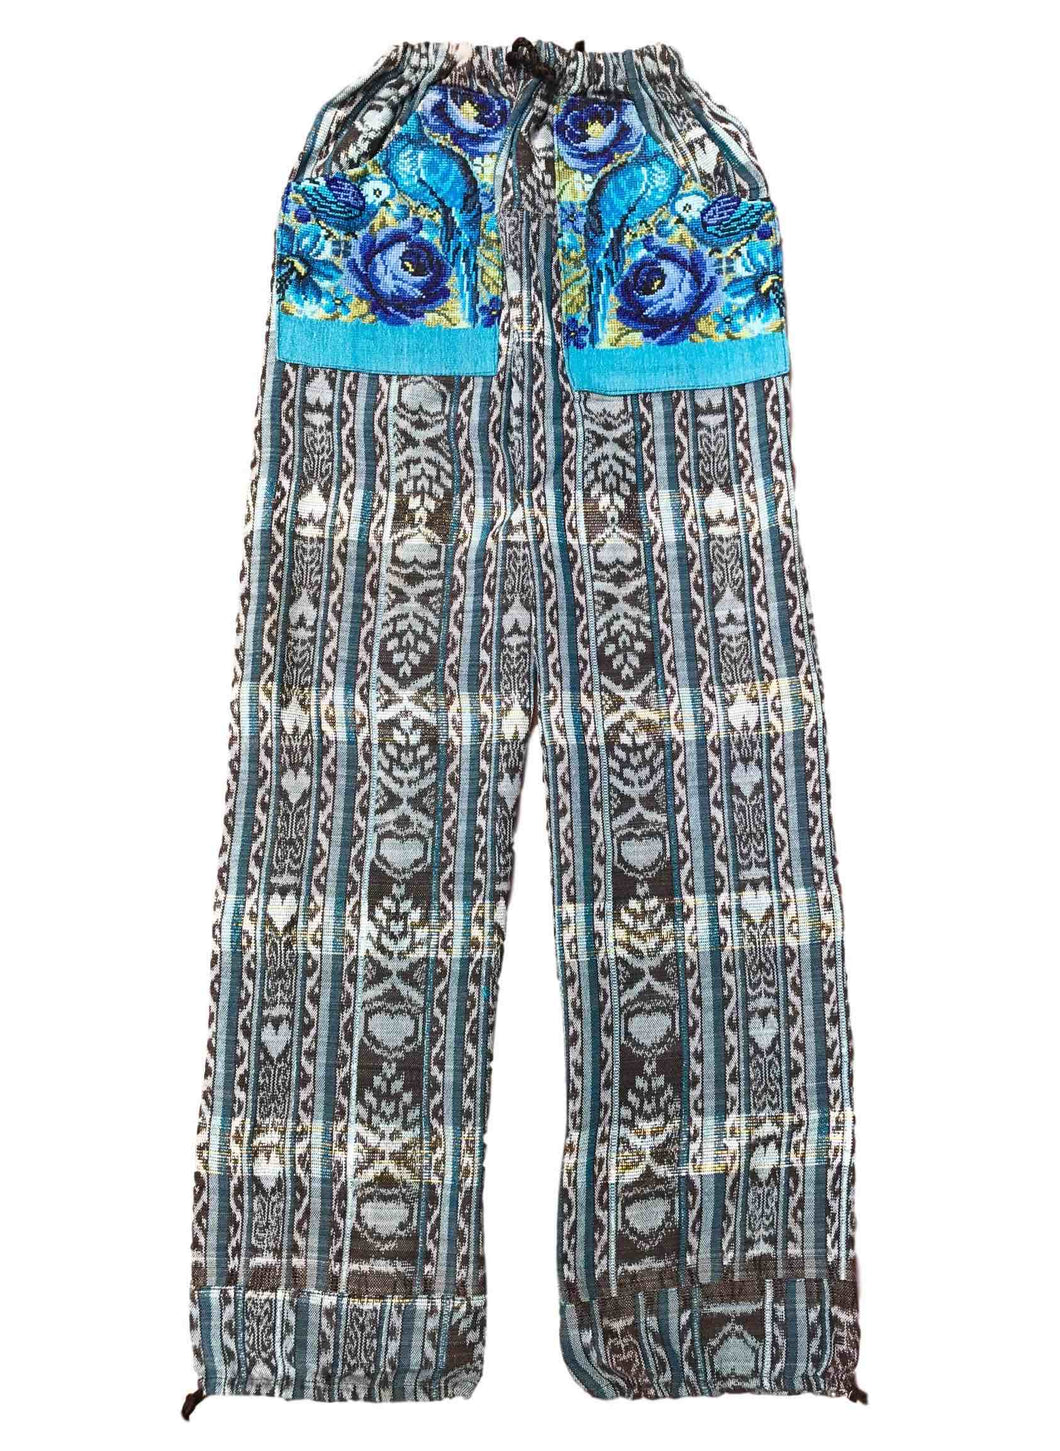 Guatemalan Corte Style Pants with Huipil Pockets - Blue - Fair Trade Gypsy